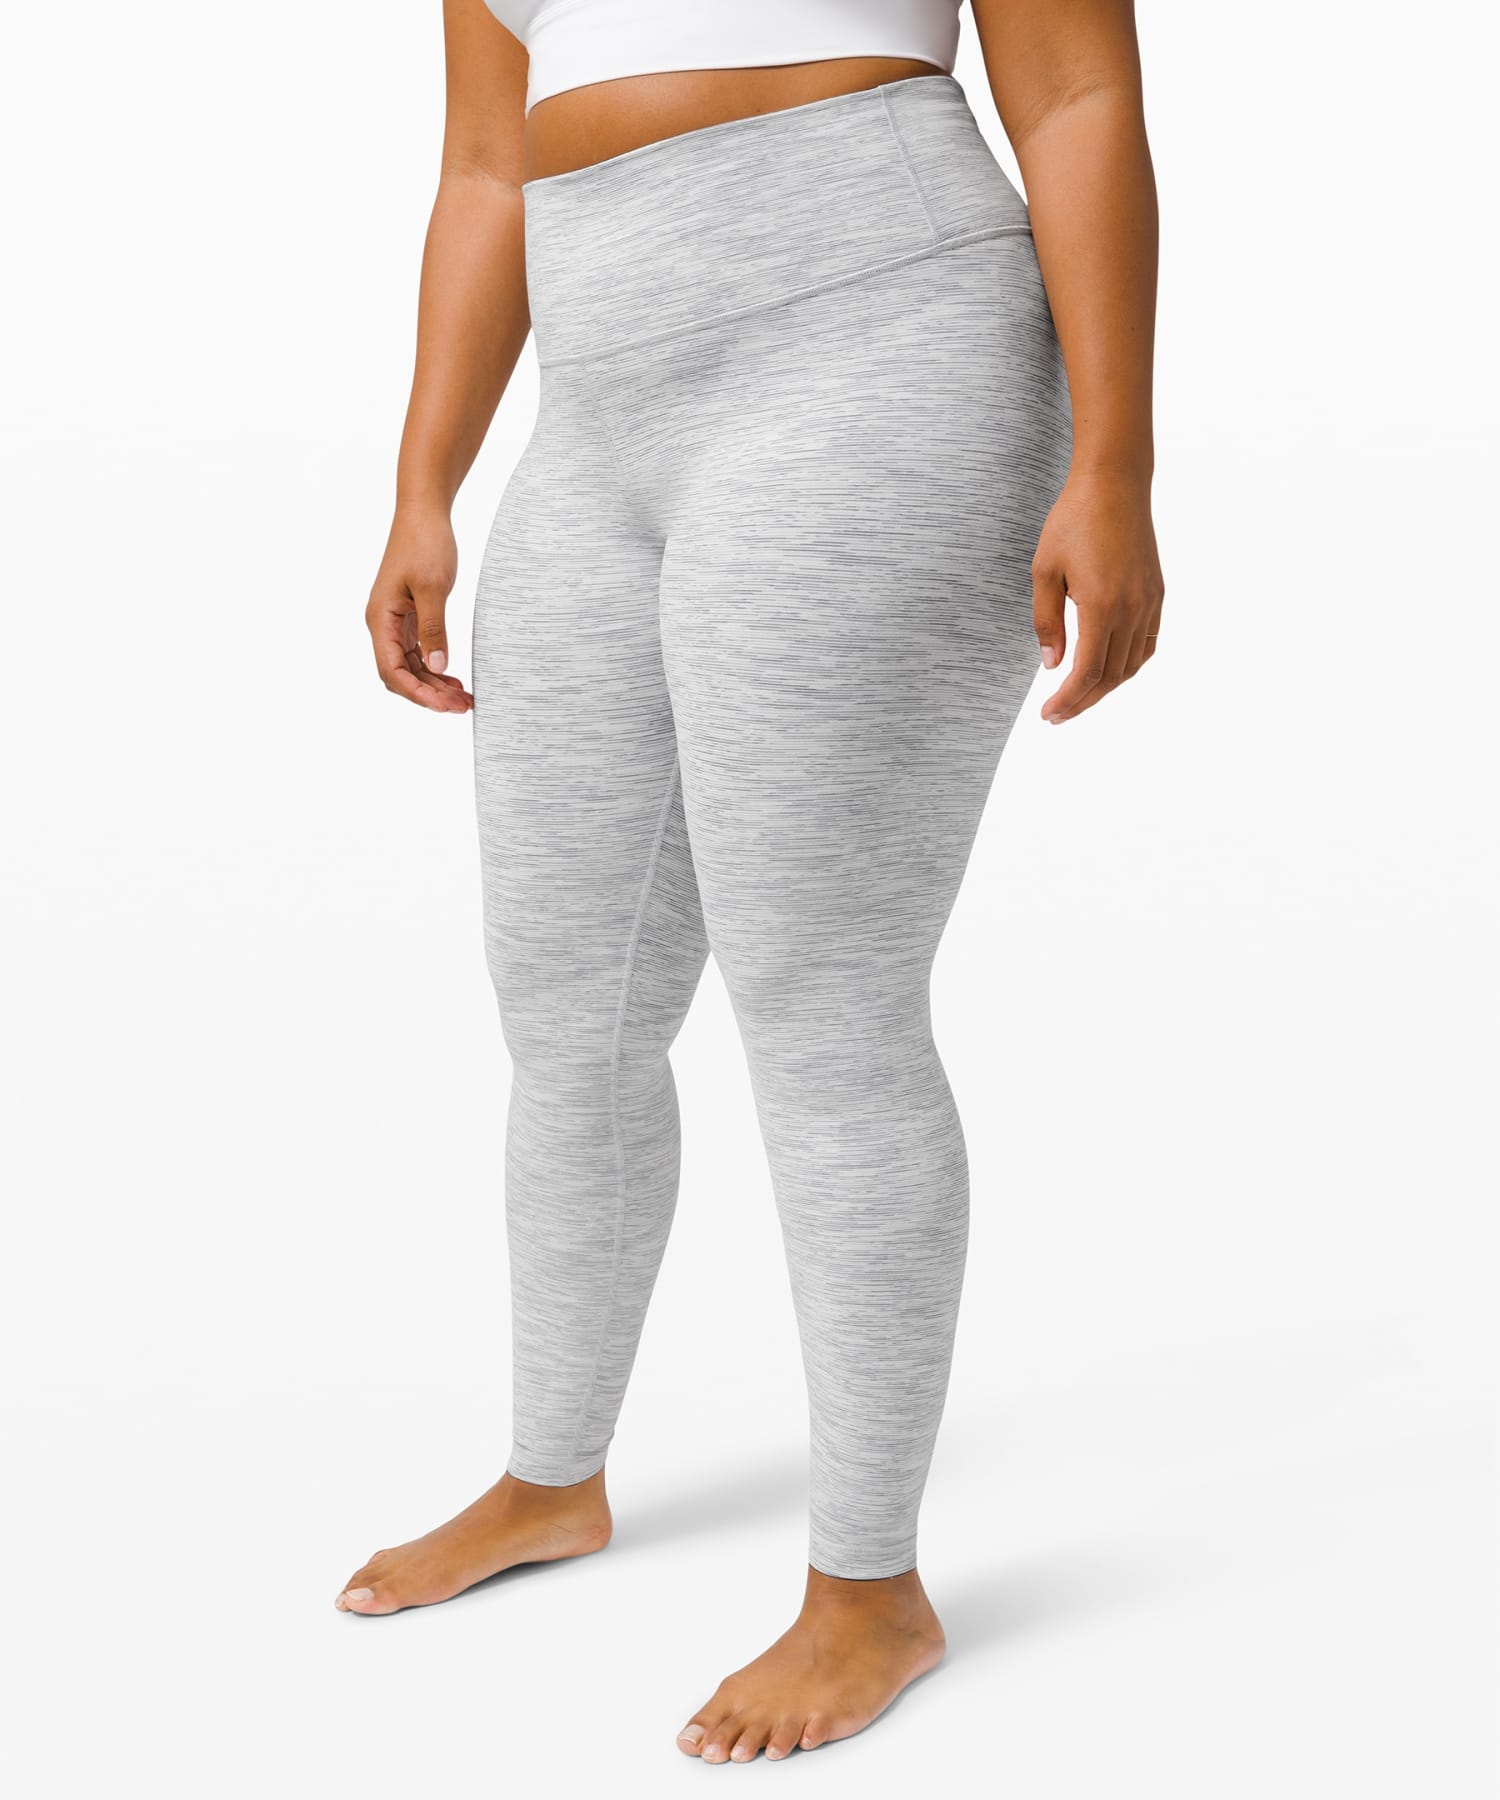 Why Lululemon leggings will always have a spot in my wardrobe